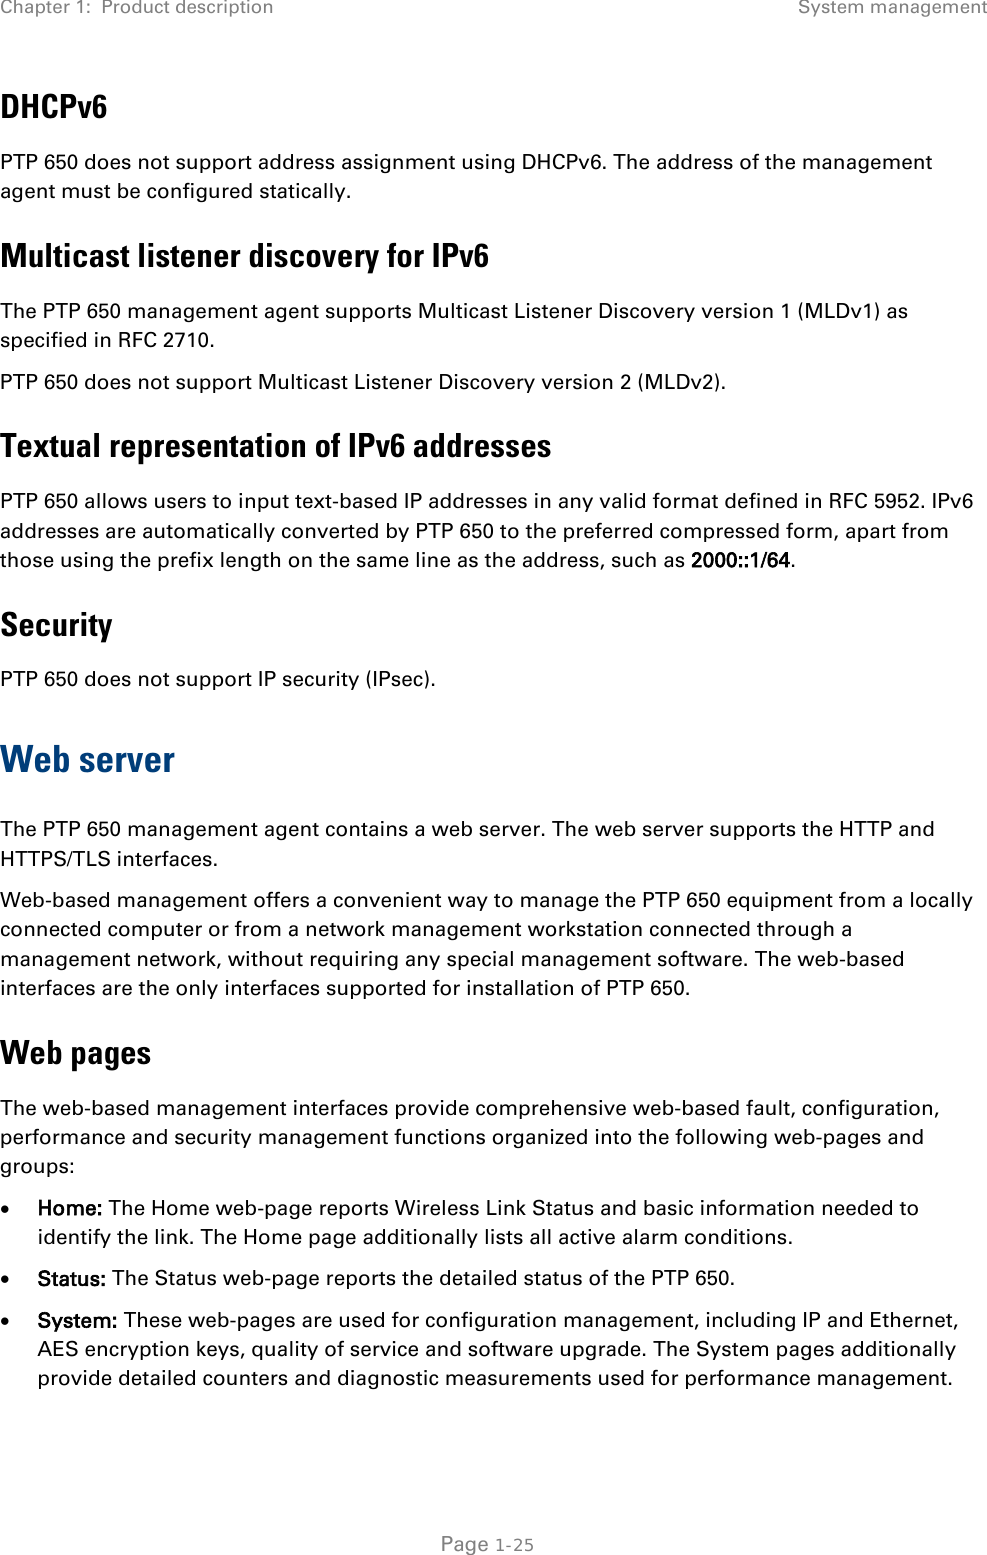 Chapter 1:  Product description System management  DHCPv6 PTP 650 does not support address assignment using DHCPv6. The address of the management agent must be configured statically. Multicast listener discovery for IPv6 The PTP 650 management agent supports Multicast Listener Discovery version 1 (MLDv1) as specified in RFC 2710. PTP 650 does not support Multicast Listener Discovery version 2 (MLDv2). Textual representation of IPv6 addresses PTP 650 allows users to input text-based IP addresses in any valid format defined in RFC 5952. IPv6 addresses are automatically converted by PTP 650 to the preferred compressed form, apart from those using the prefix length on the same line as the address, such as 2000::1/64. Security PTP 650 does not support IP security (IPsec). Web server The PTP 650 management agent contains a web server. The web server supports the HTTP and HTTPS/TLS interfaces. Web-based management offers a convenient way to manage the PTP 650 equipment from a locally connected computer or from a network management workstation connected through a management network, without requiring any special management software. The web-based interfaces are the only interfaces supported for installation of PTP 650. Web pages The web-based management interfaces provide comprehensive web-based fault, configuration, performance and security management functions organized into the following web-pages and groups: • Home: The Home web-page reports Wireless Link Status and basic information needed to identify the link. The Home page additionally lists all active alarm conditions. • Status: The Status web-page reports the detailed status of the PTP 650. • System: These web-pages are used for configuration management, including IP and Ethernet, AES encryption keys, quality of service and software upgrade. The System pages additionally provide detailed counters and diagnostic measurements used for performance management.  Page 1-25 